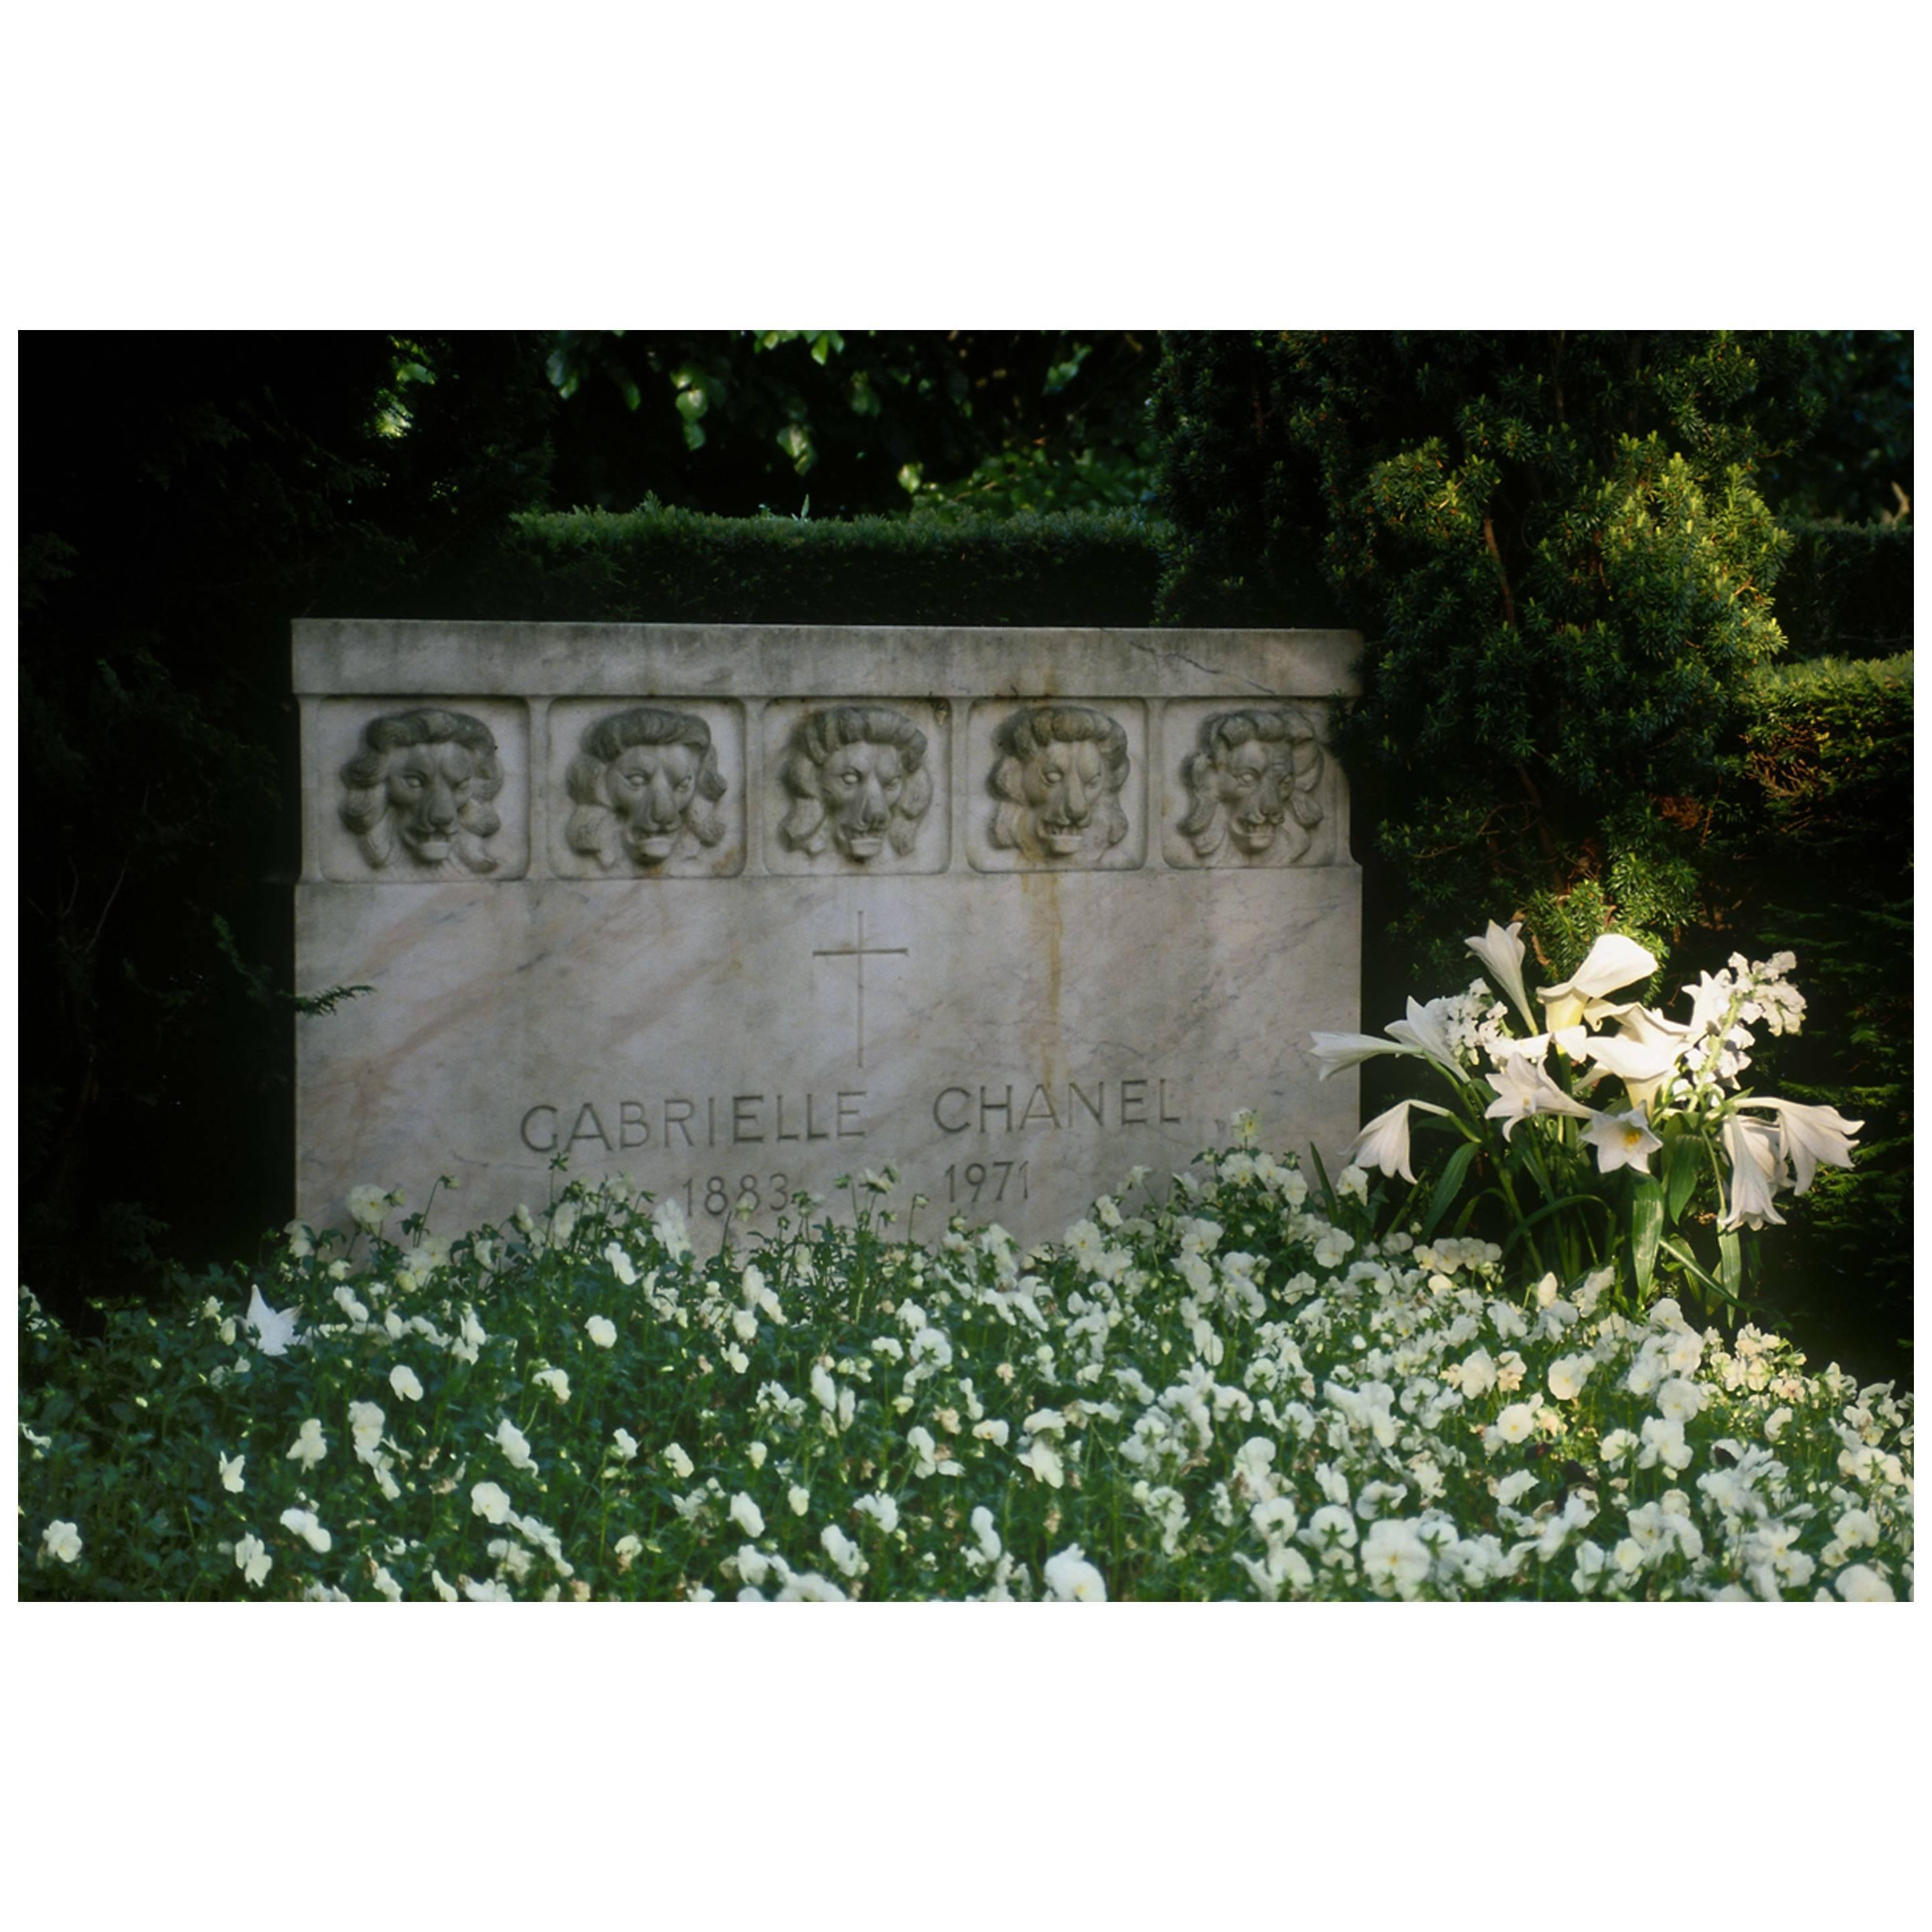 Final Resting Place of Gabrielle "Coco" Chanel by Gregg Felsen For Sale